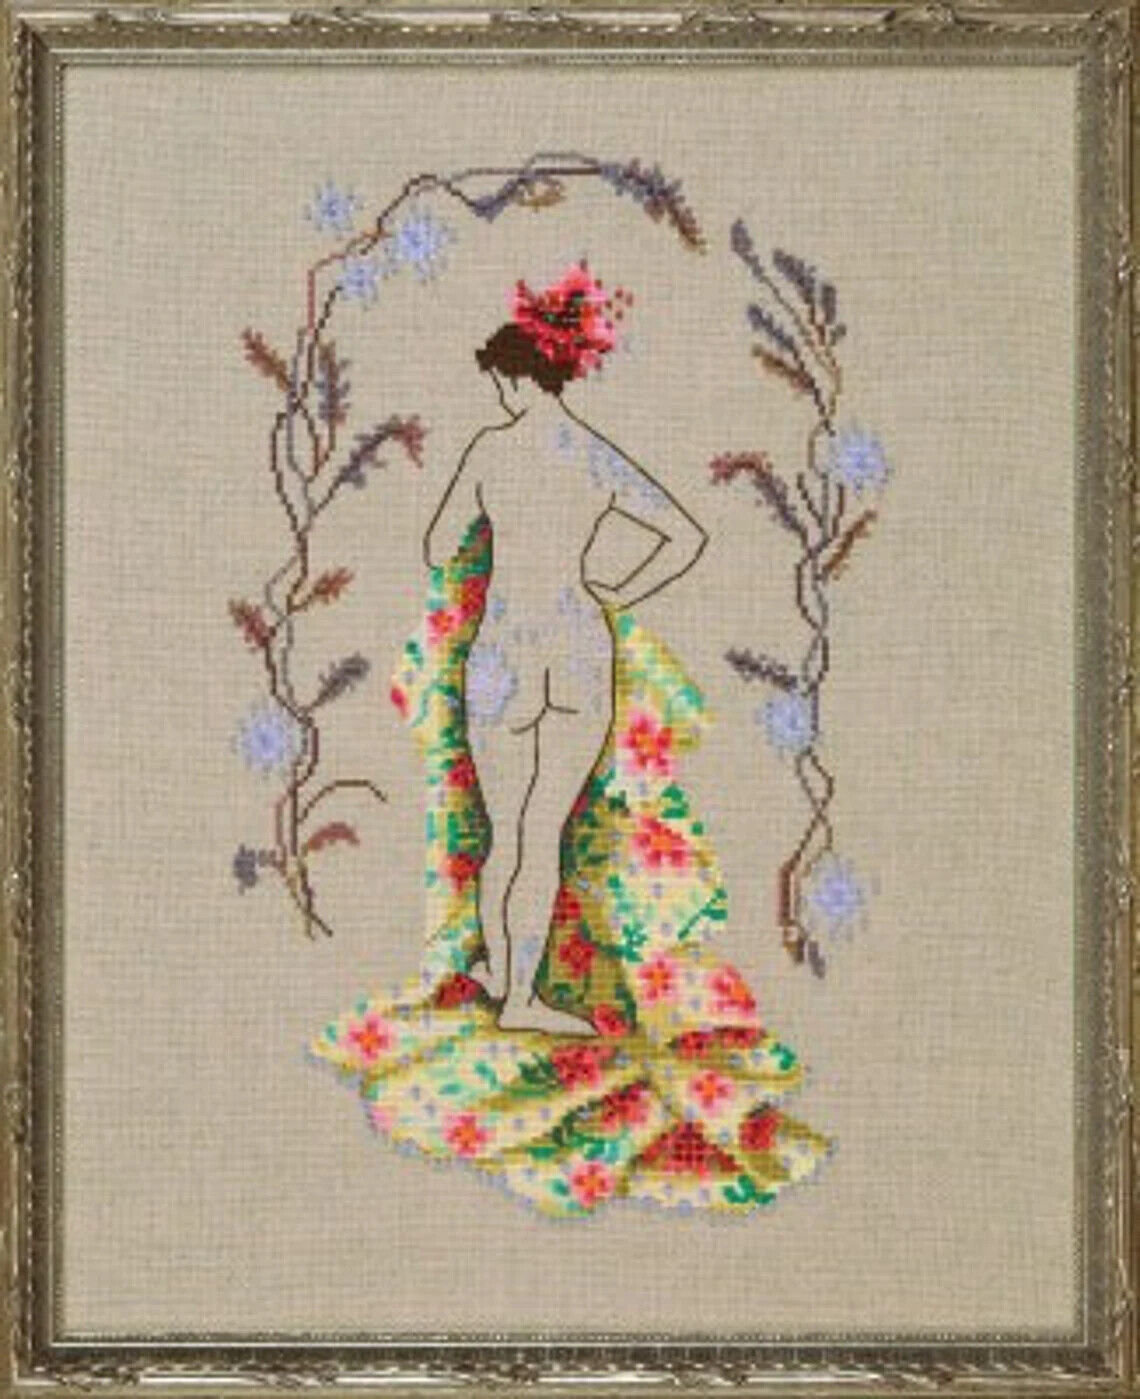 Primary image for SALE! Complete Xstitch Materials NC340 FLORAL DREAM by Nora Corbett